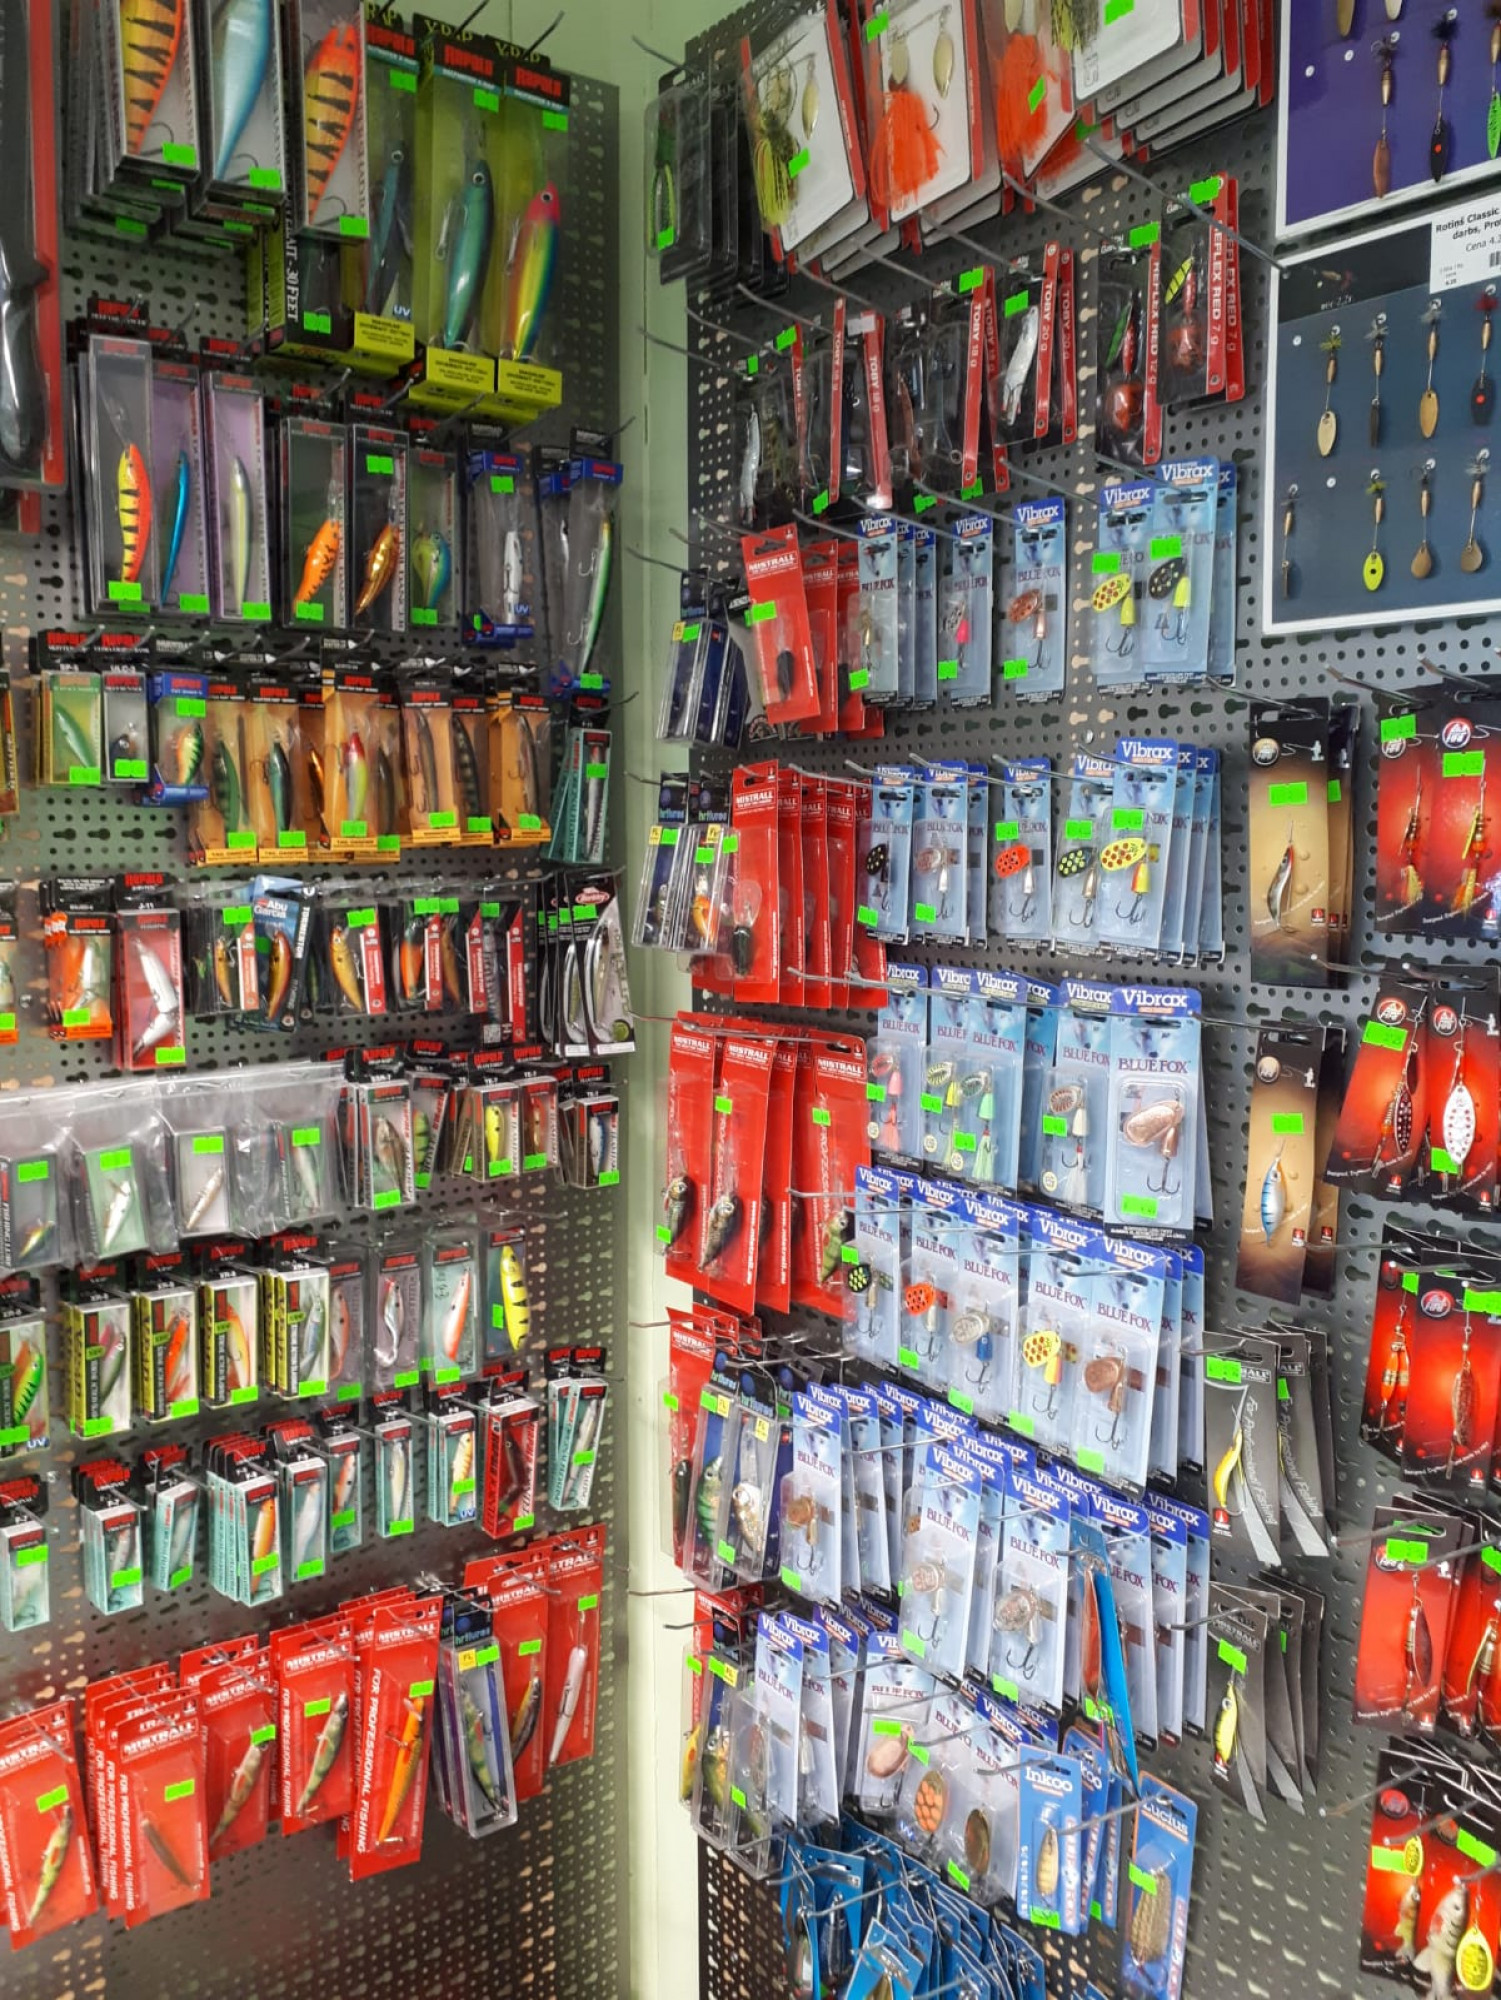 Fishing rods, hooks, wobblers and everything else for fisherman